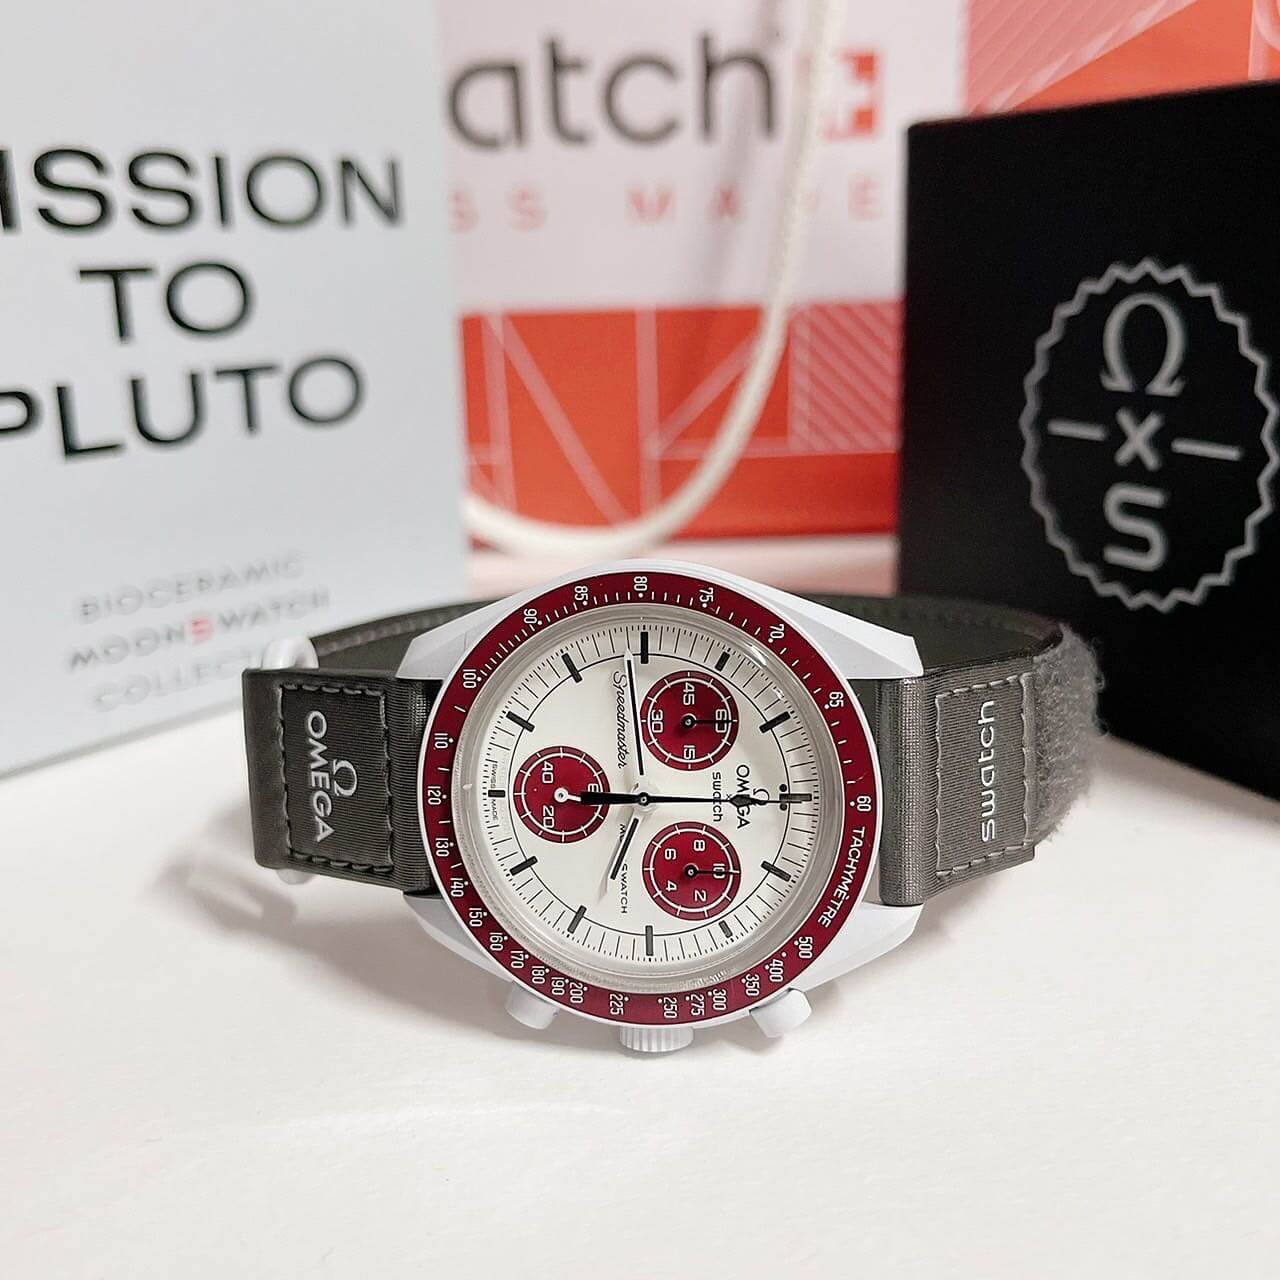 Omega MoonSwatch Mission to Pluto SO33M101